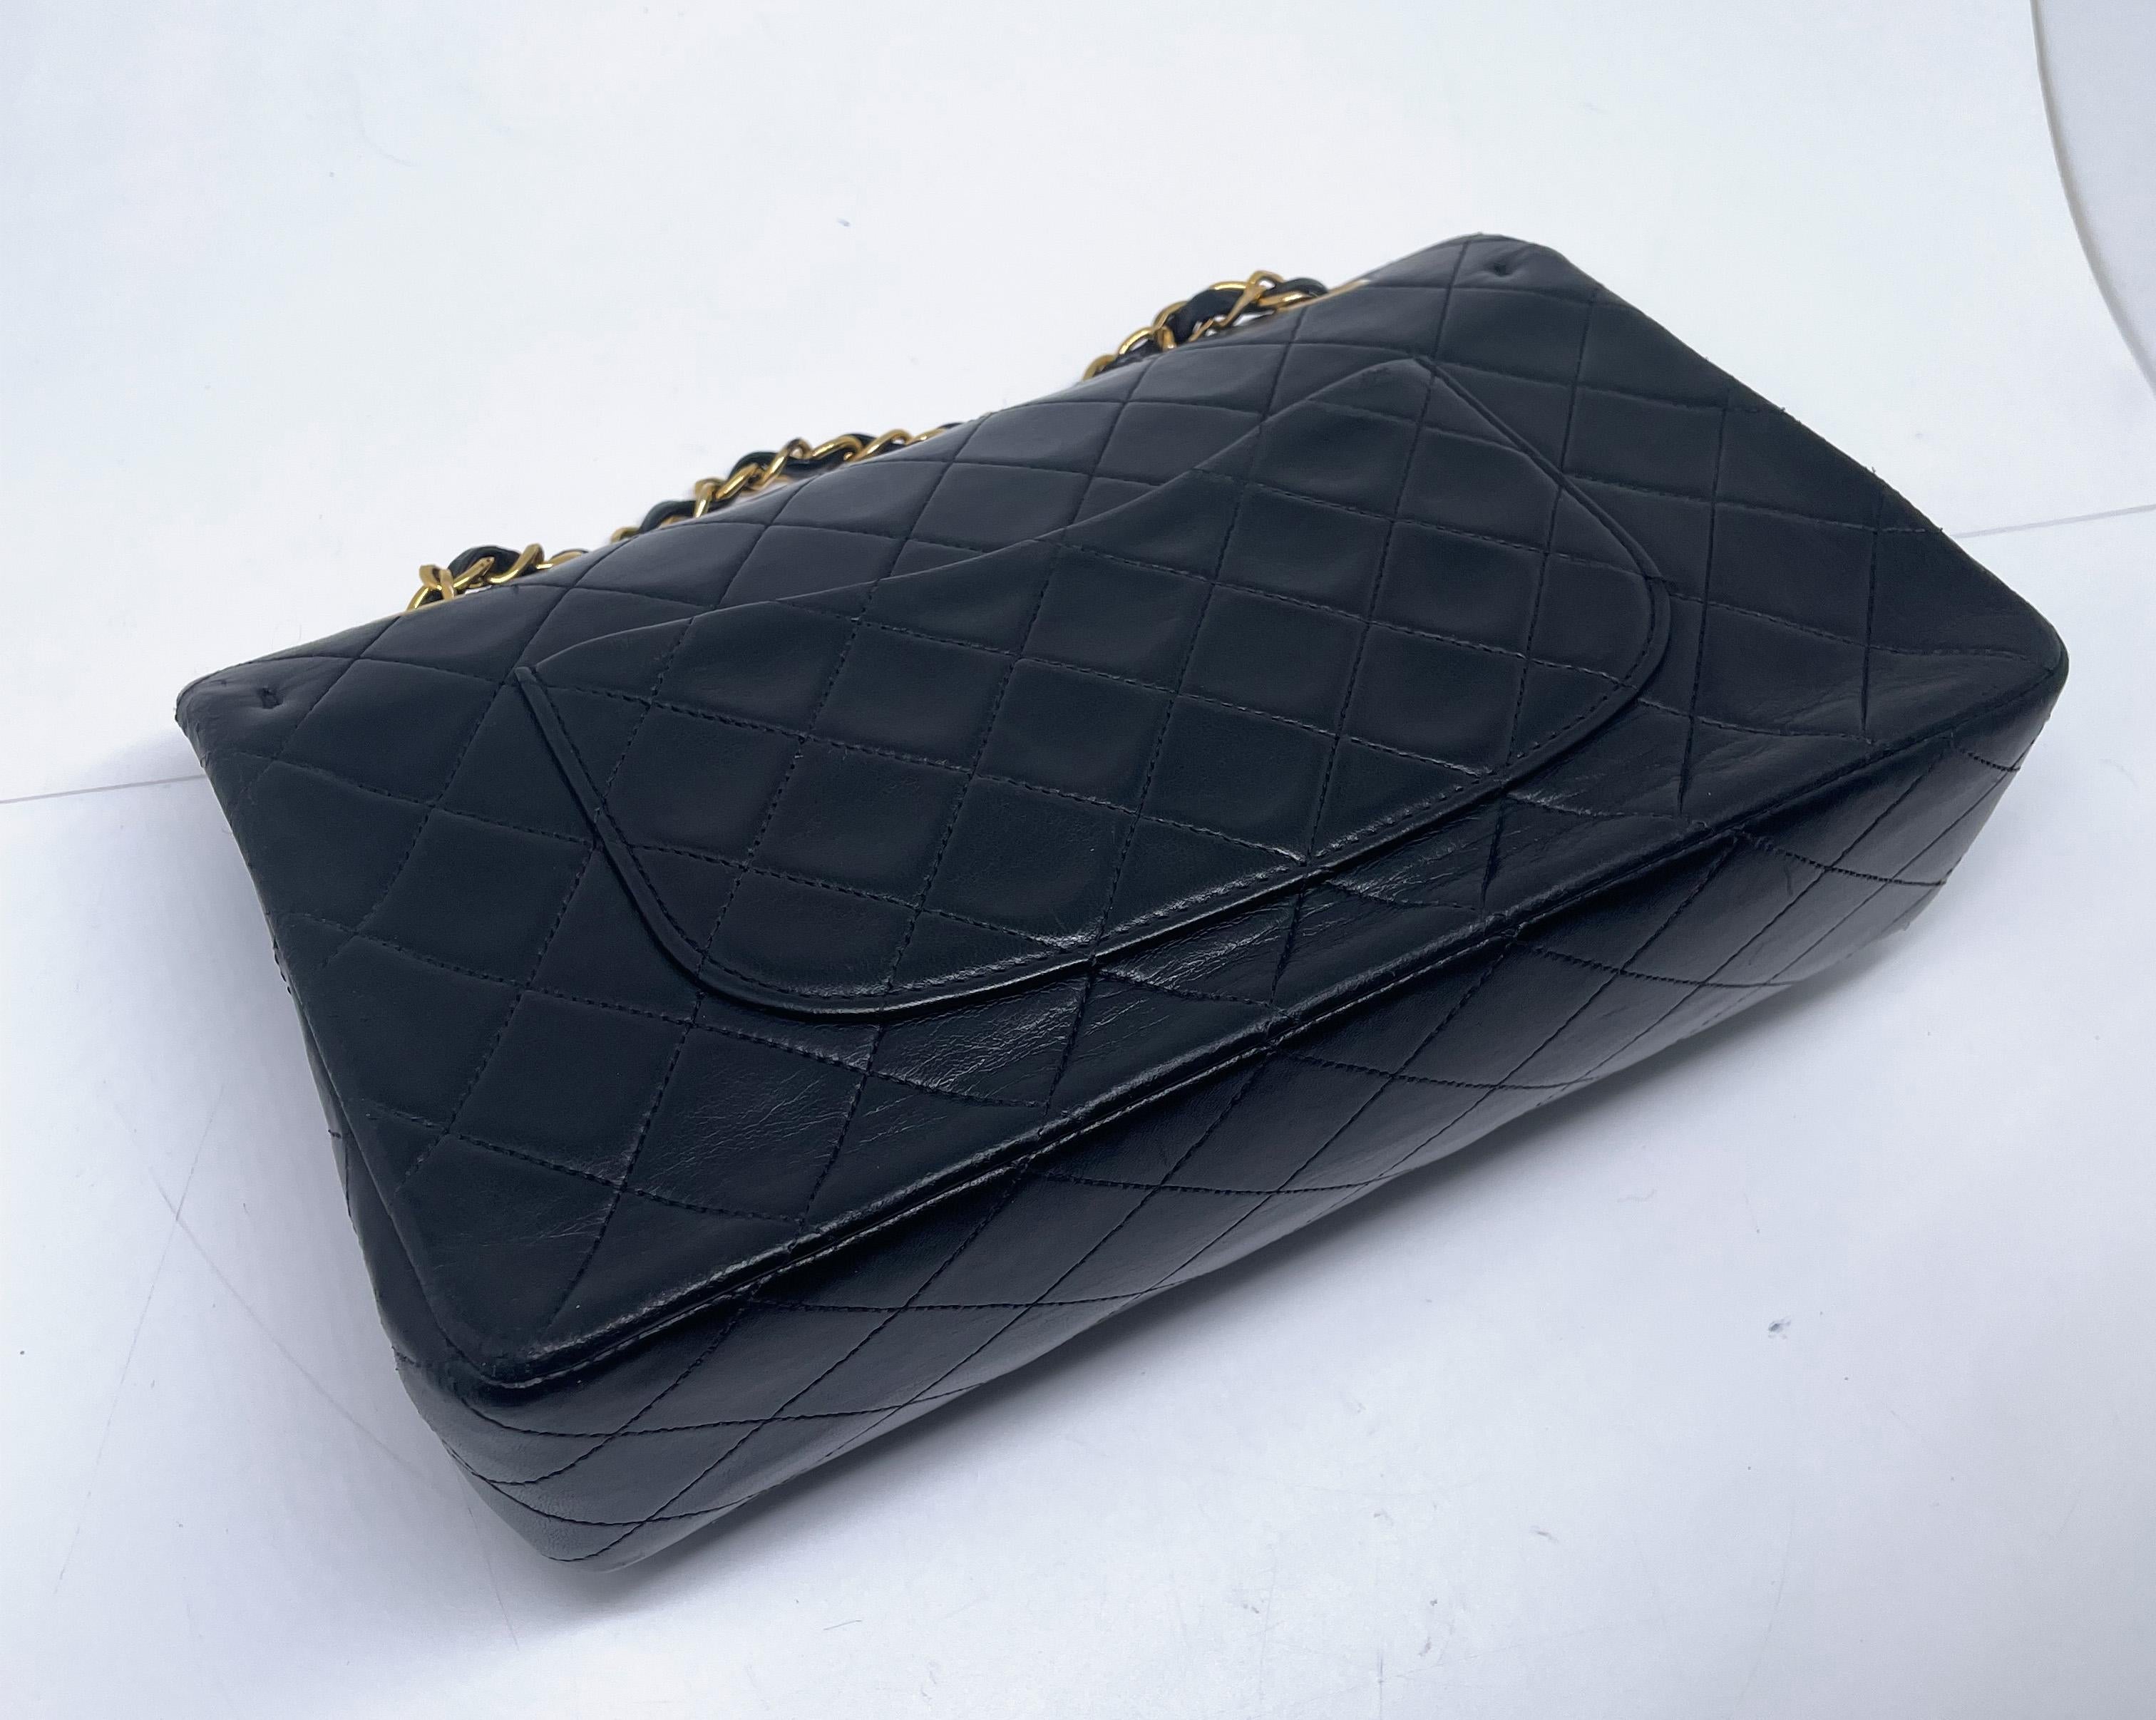 Chanel Classique handbag in black lambskin and 24-carat plated gold metal For Sale 12